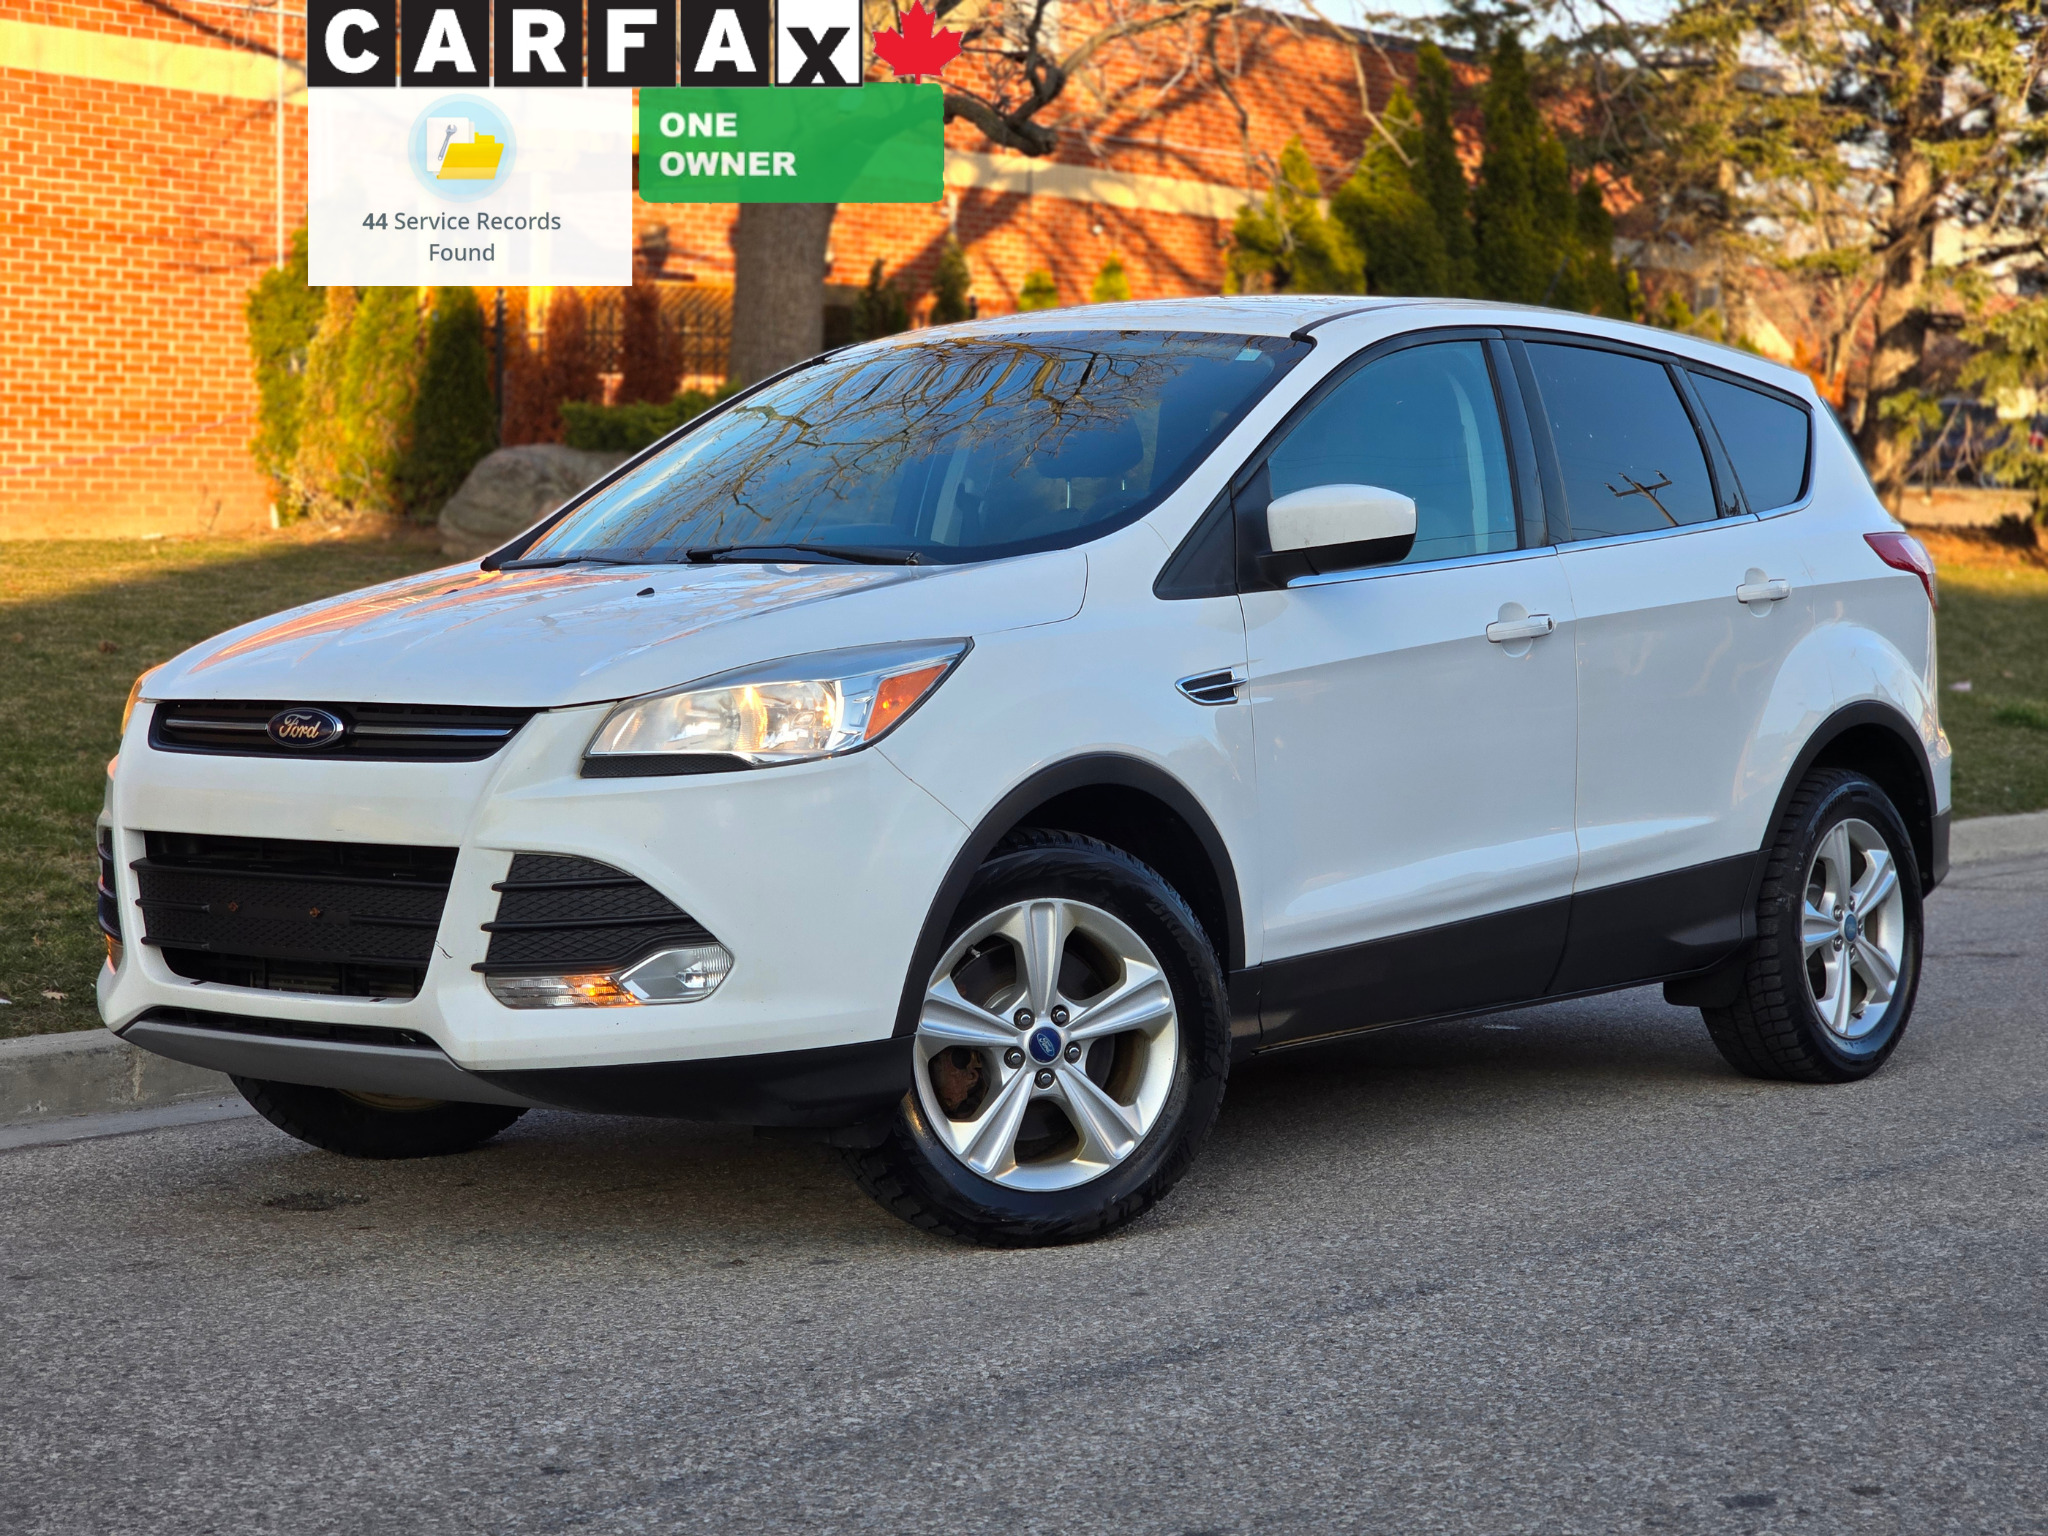 2013 Ford Escape ONE Owner ** 44 service records** ONLY 155,000Km's